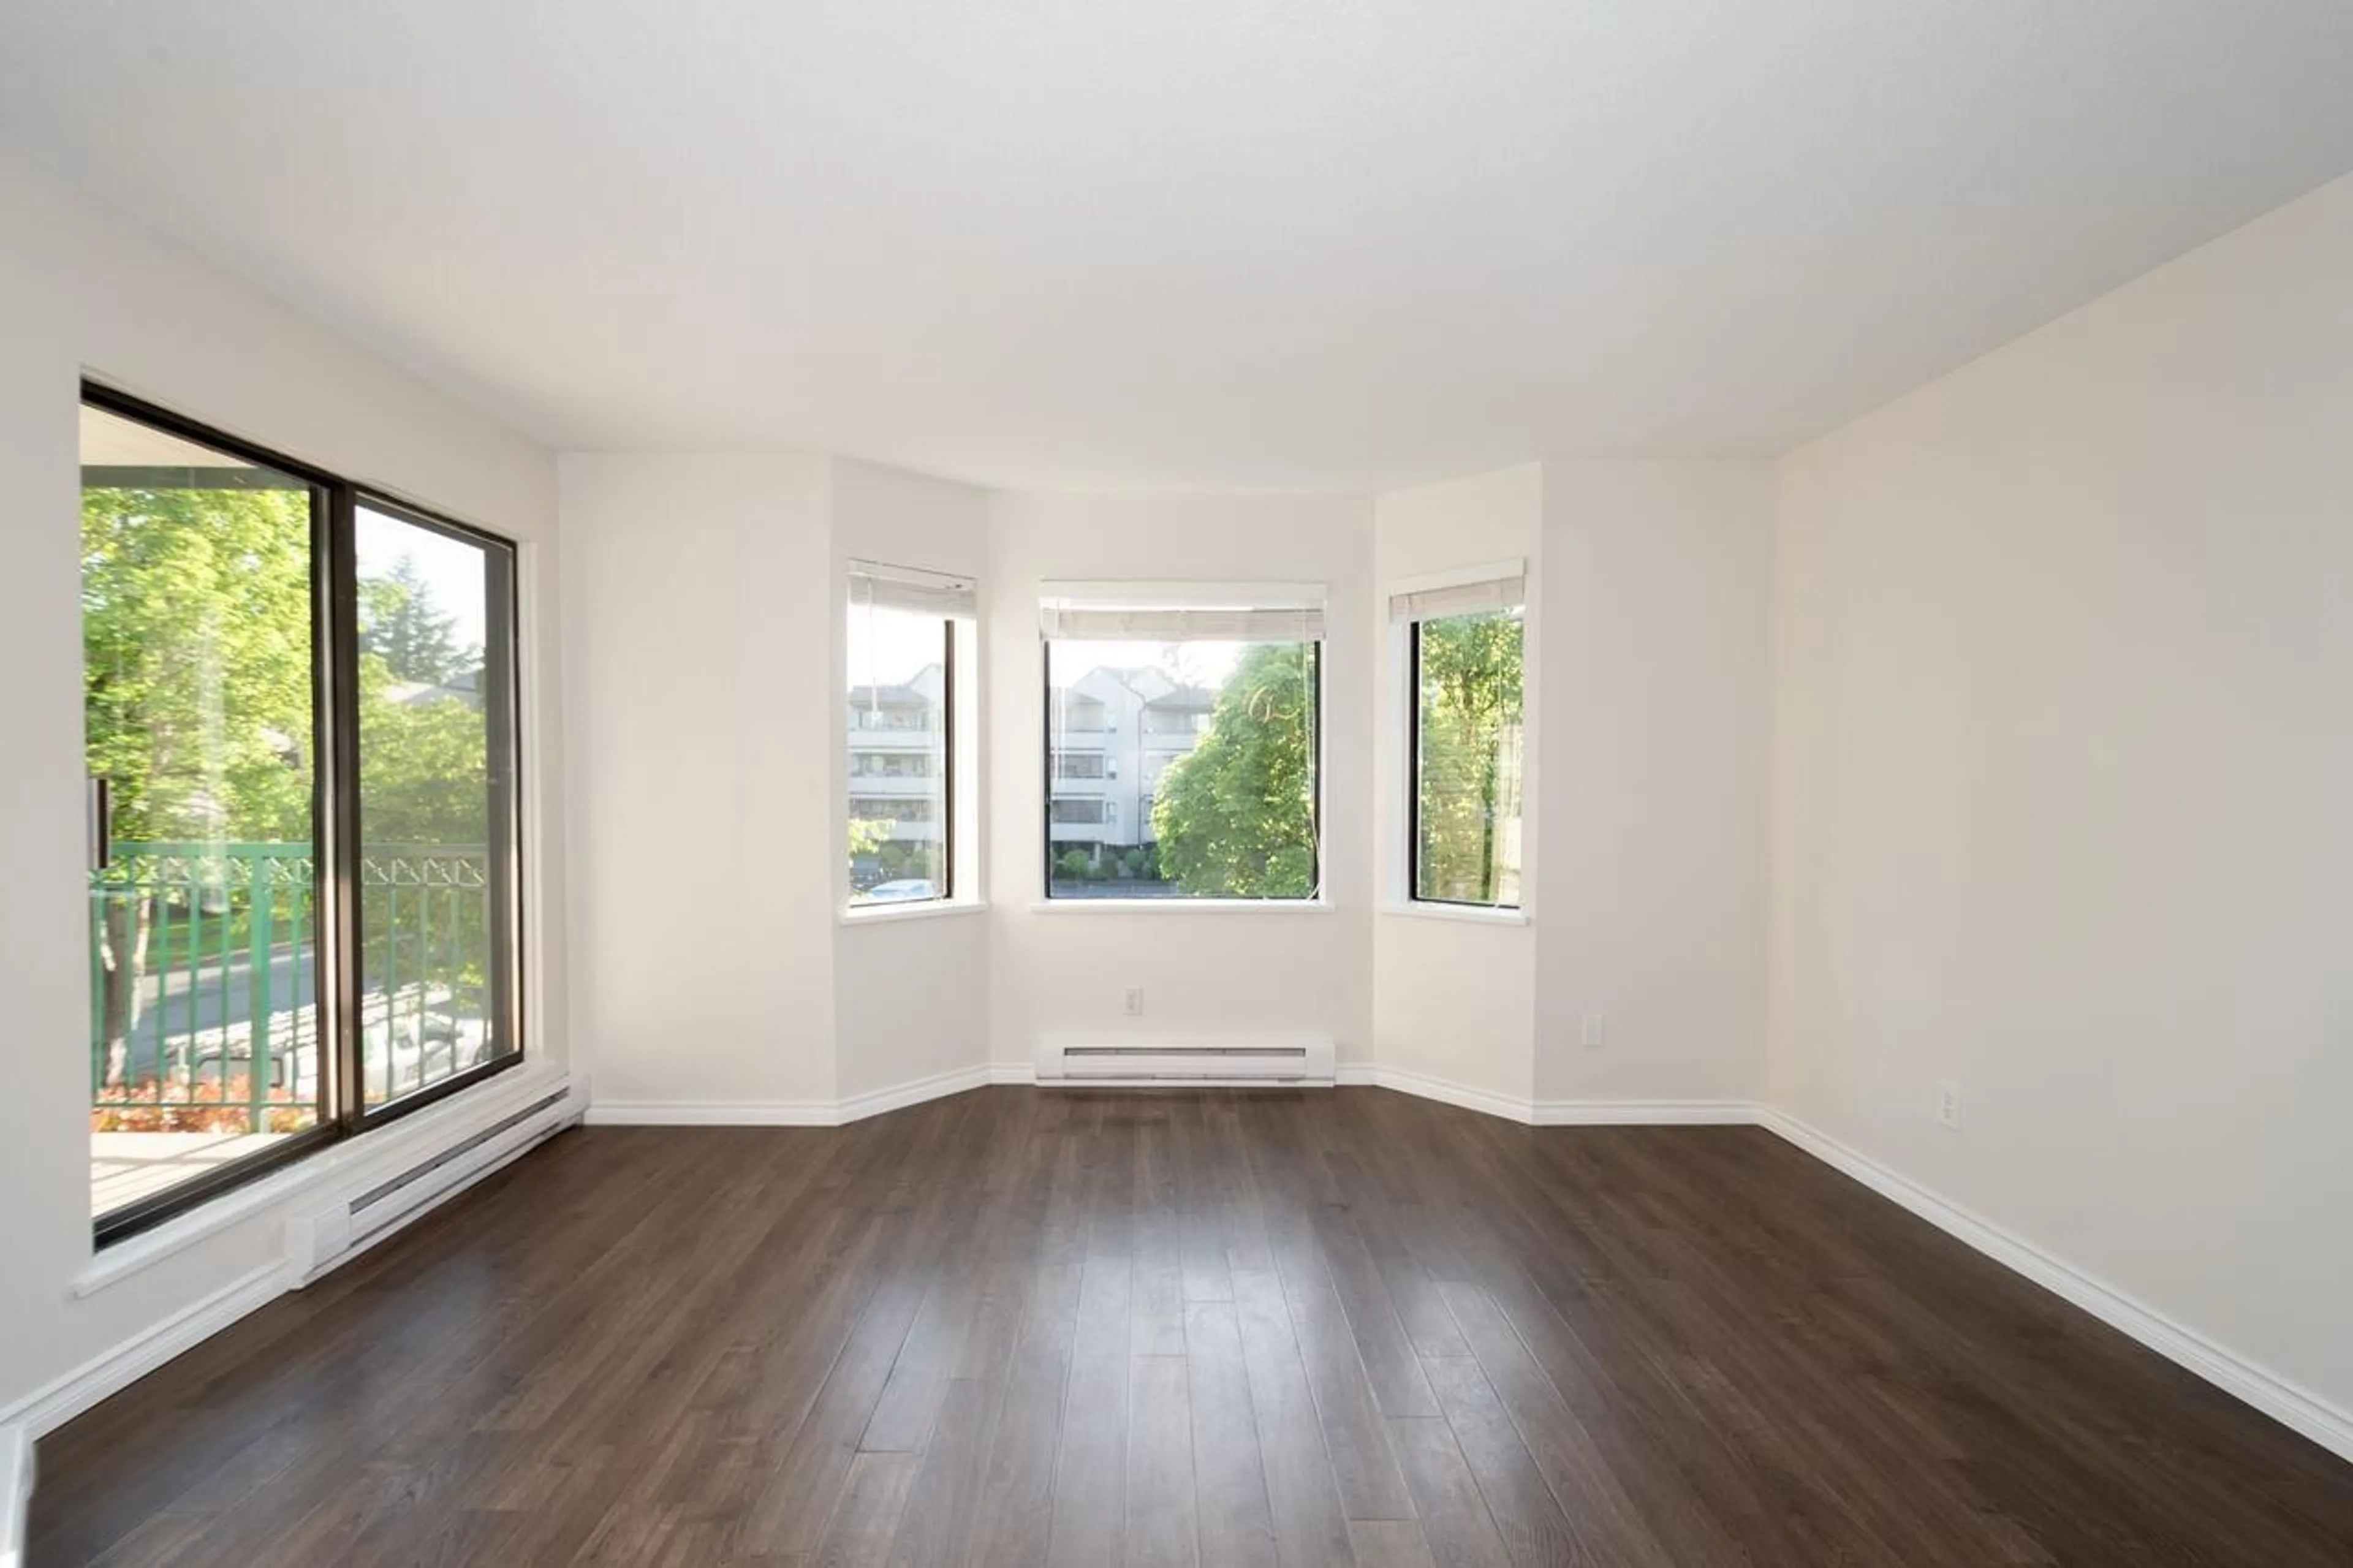 A pic of a room for 214 20454 53 AVENUE, Langley British Columbia V3A7S1